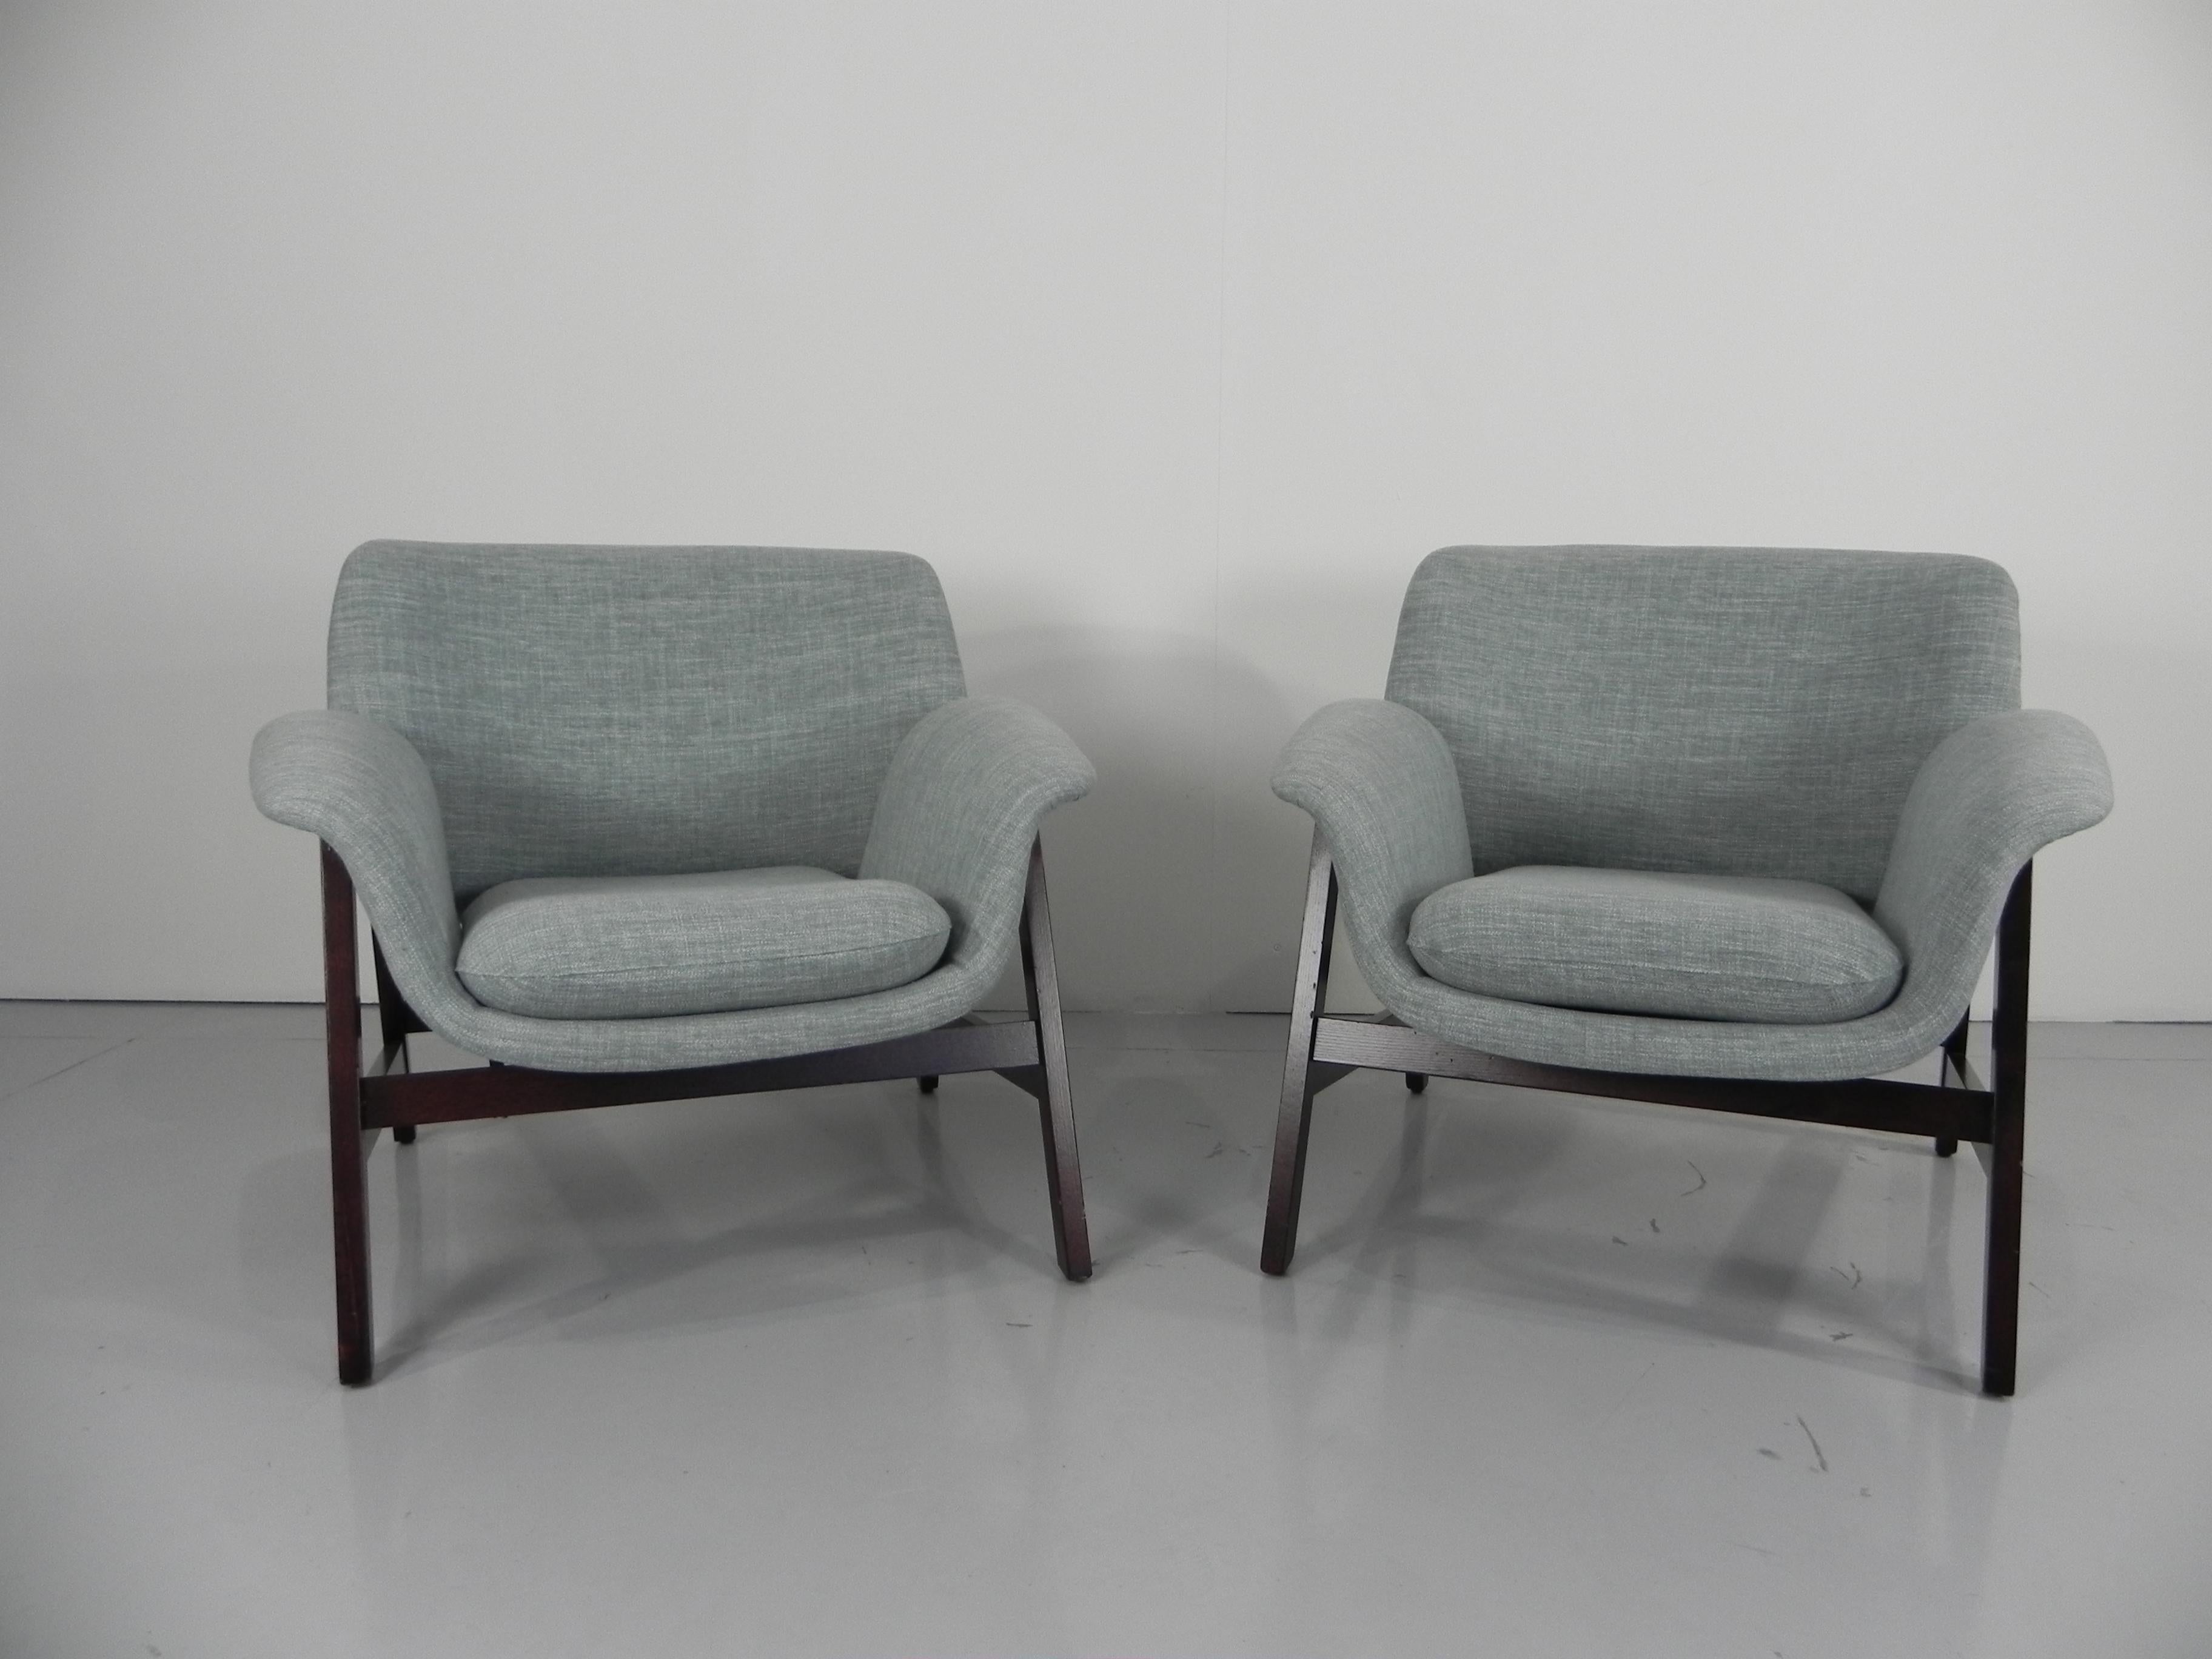 A pair of armchairs designed by Gianfranco Frattini for Cassina. Foam padded and fabric upholstered seat and backrest, wooden structure. Model: 849. Manufactured in Italy, 1960s.